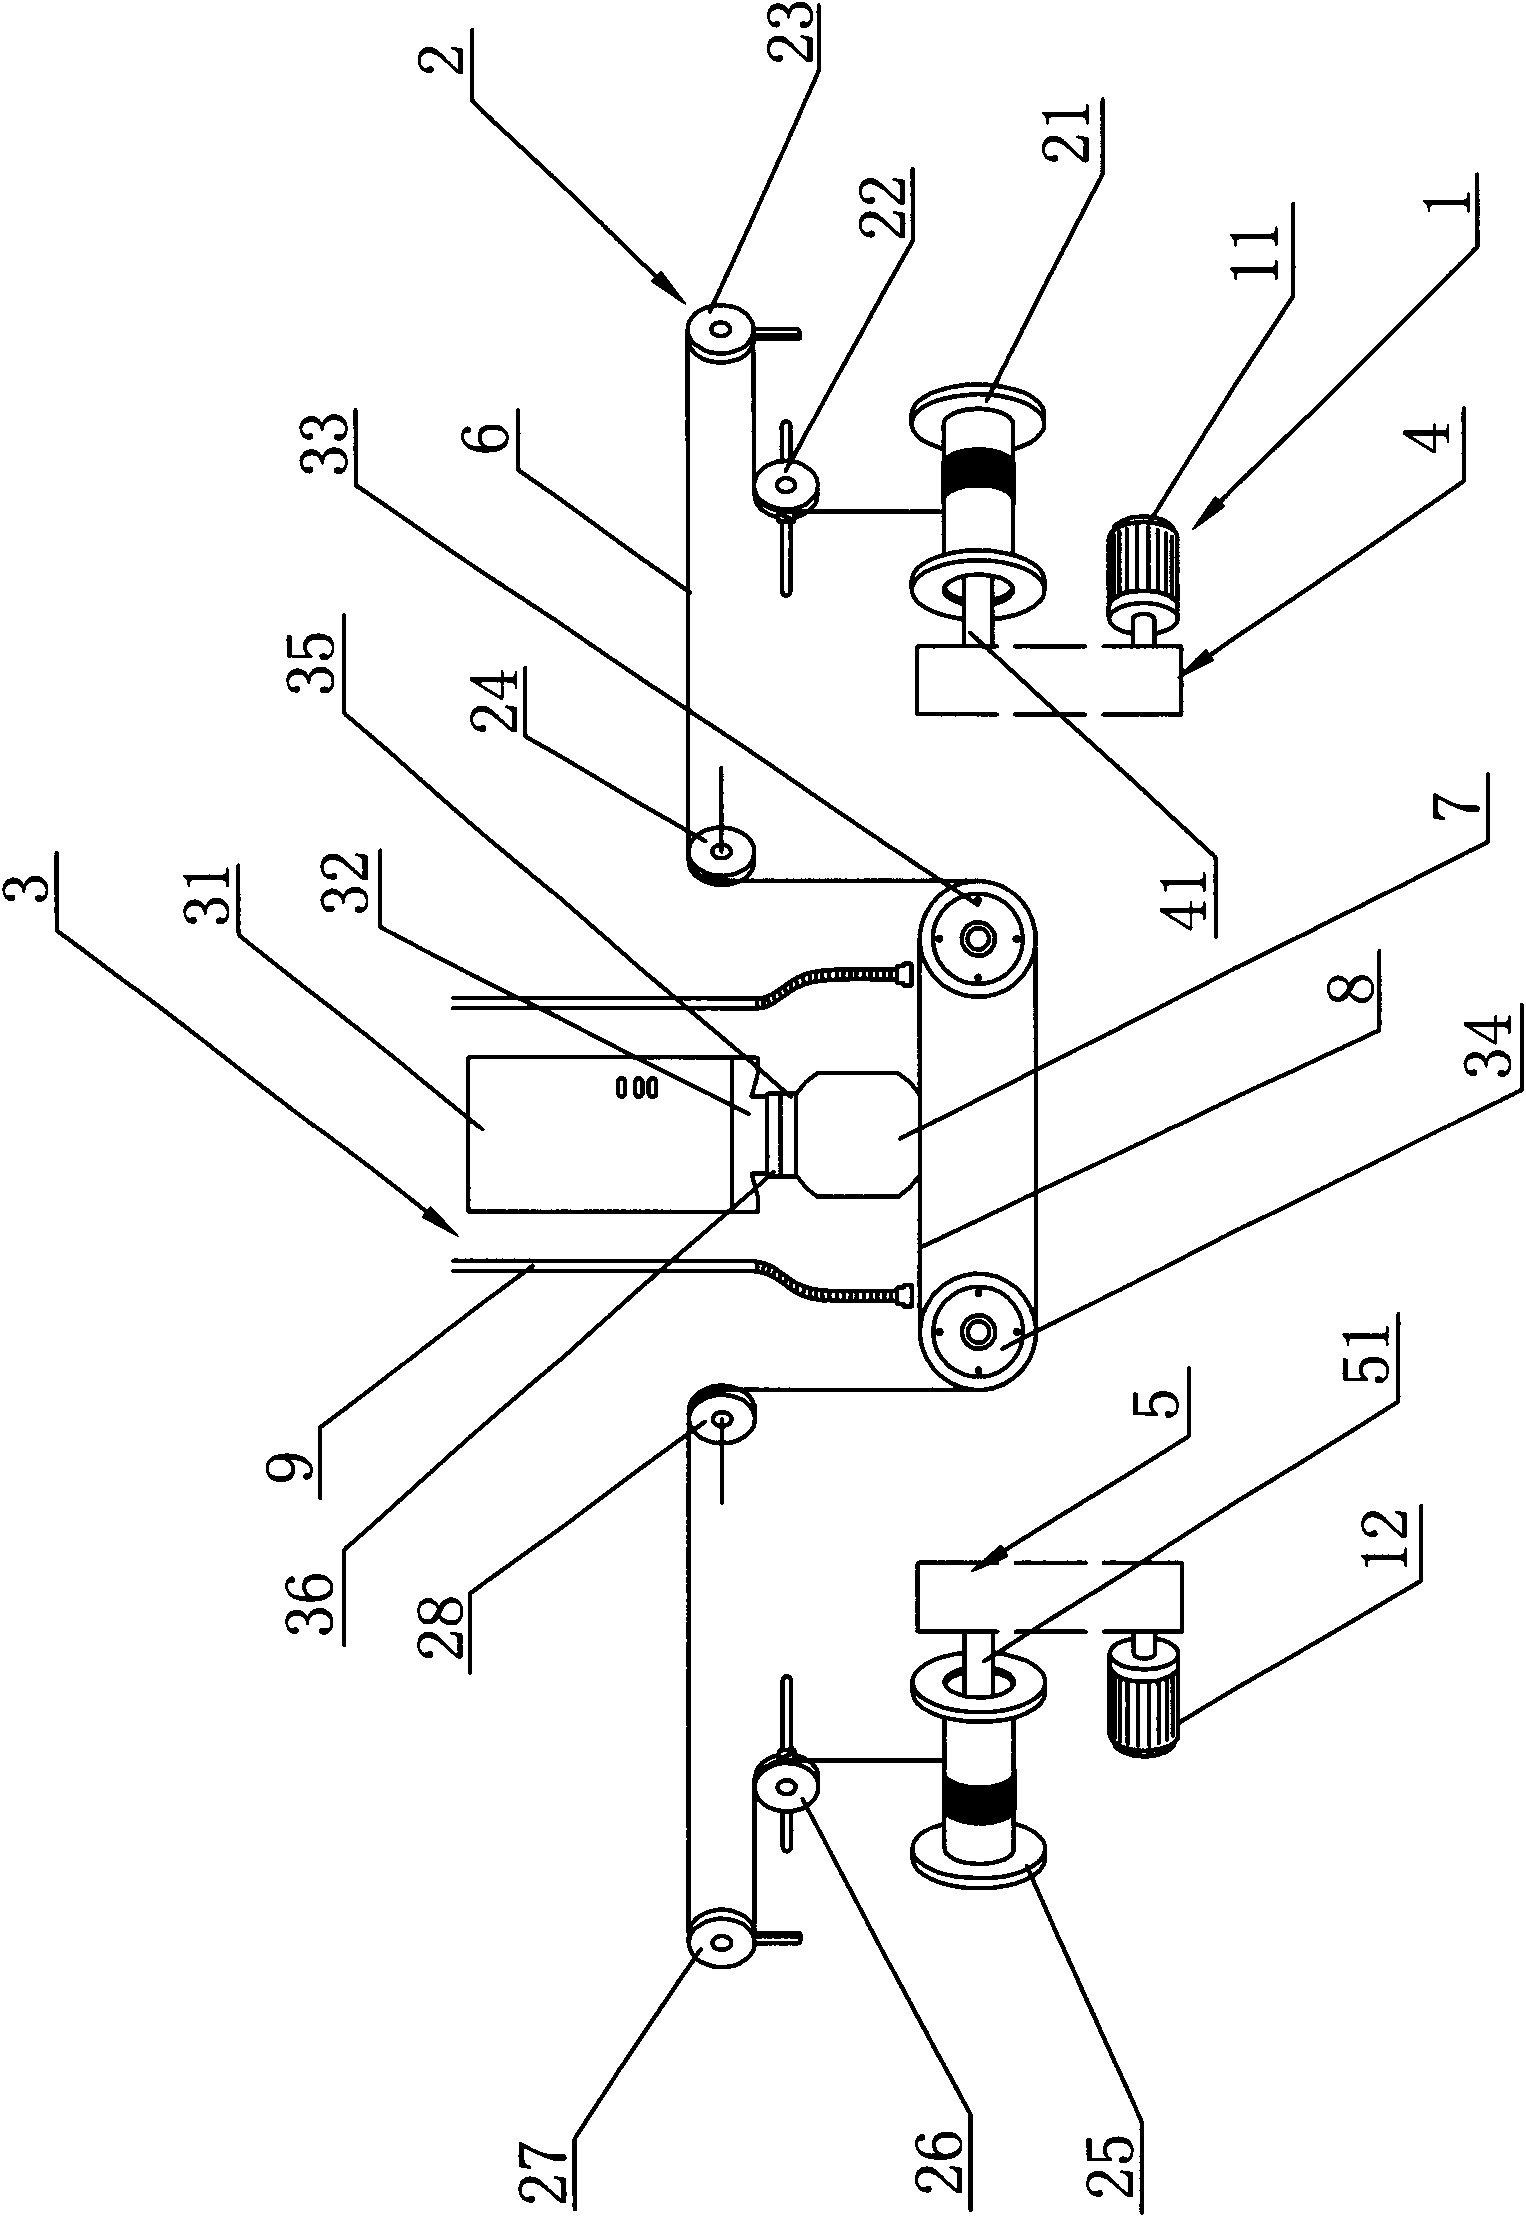 Method for cutting silicon chips